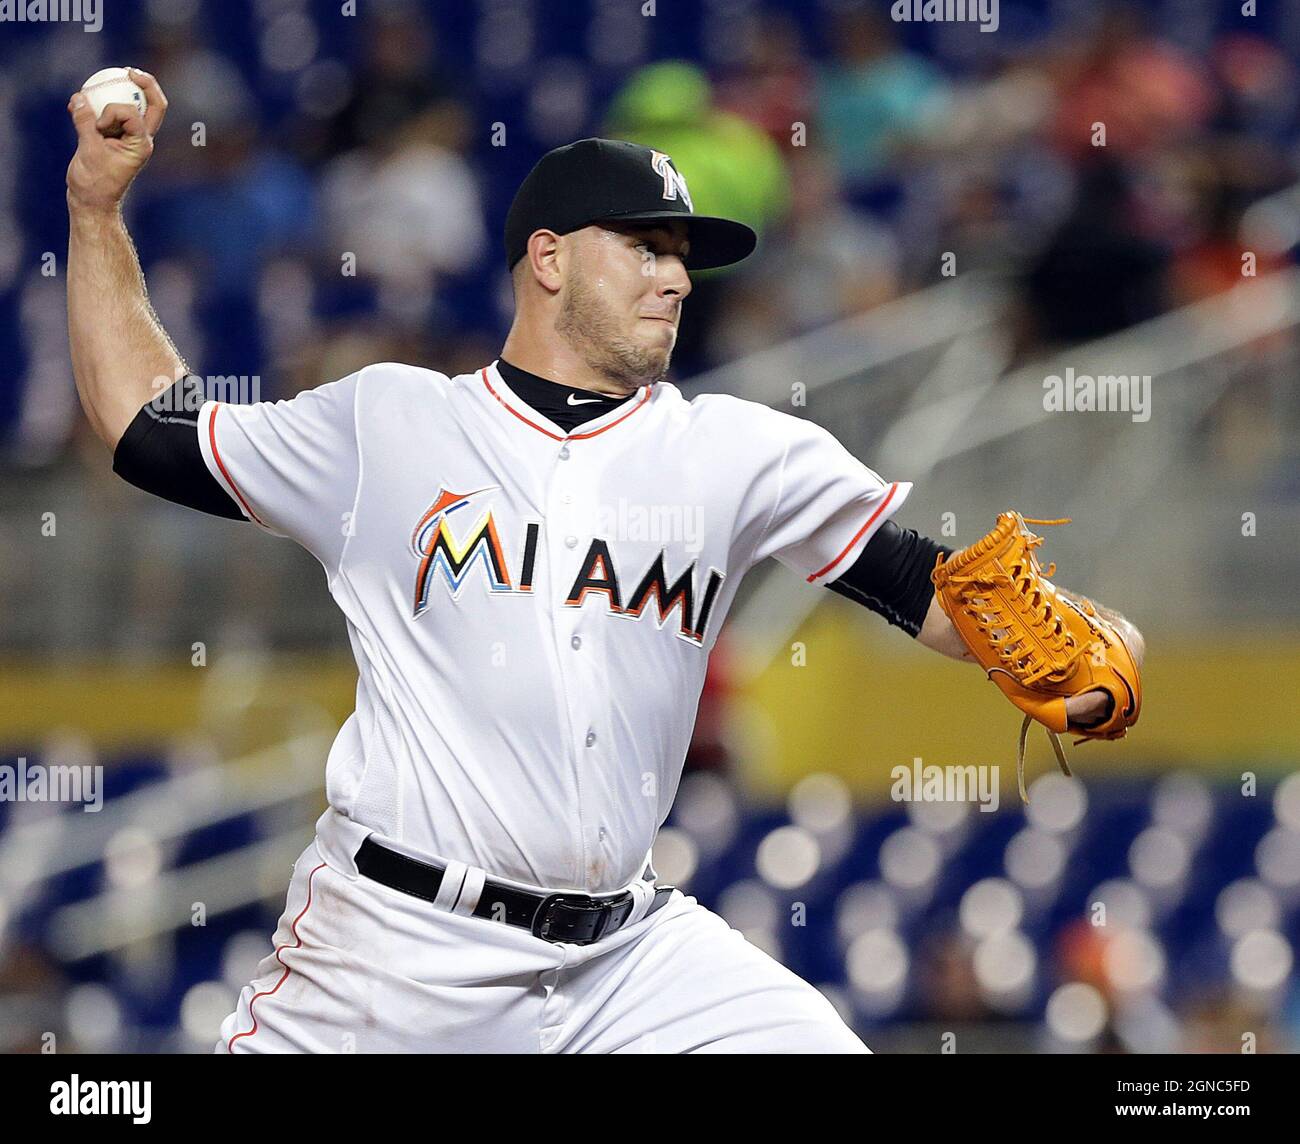 The Miami Marlins' Jose Fernandez pitches in the first inning against the Los Angeles Dodgers at Marlins Park in Miami, Florida on Thursday, September 9, 2016. (Photo by Pedro Portal/Miami Herald/TNS/Sipa USA) Stock Photo